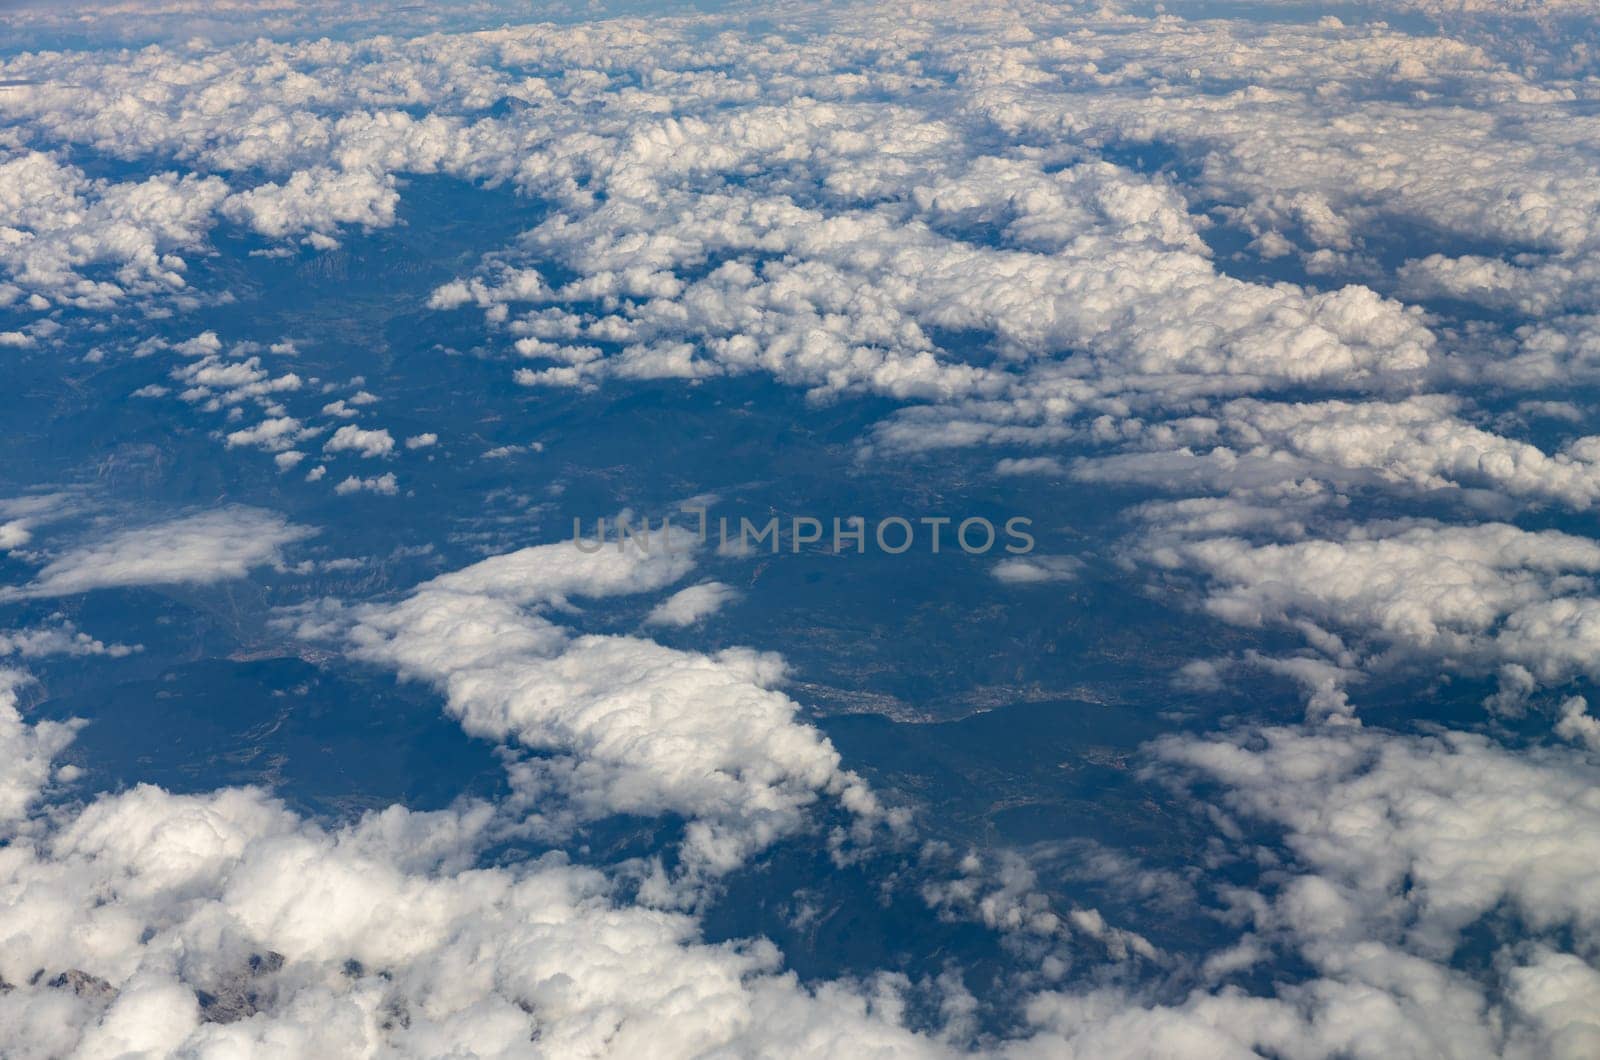 A beautiful view of the white clouds hanging above the ground through the porthole window, side view, close-up.